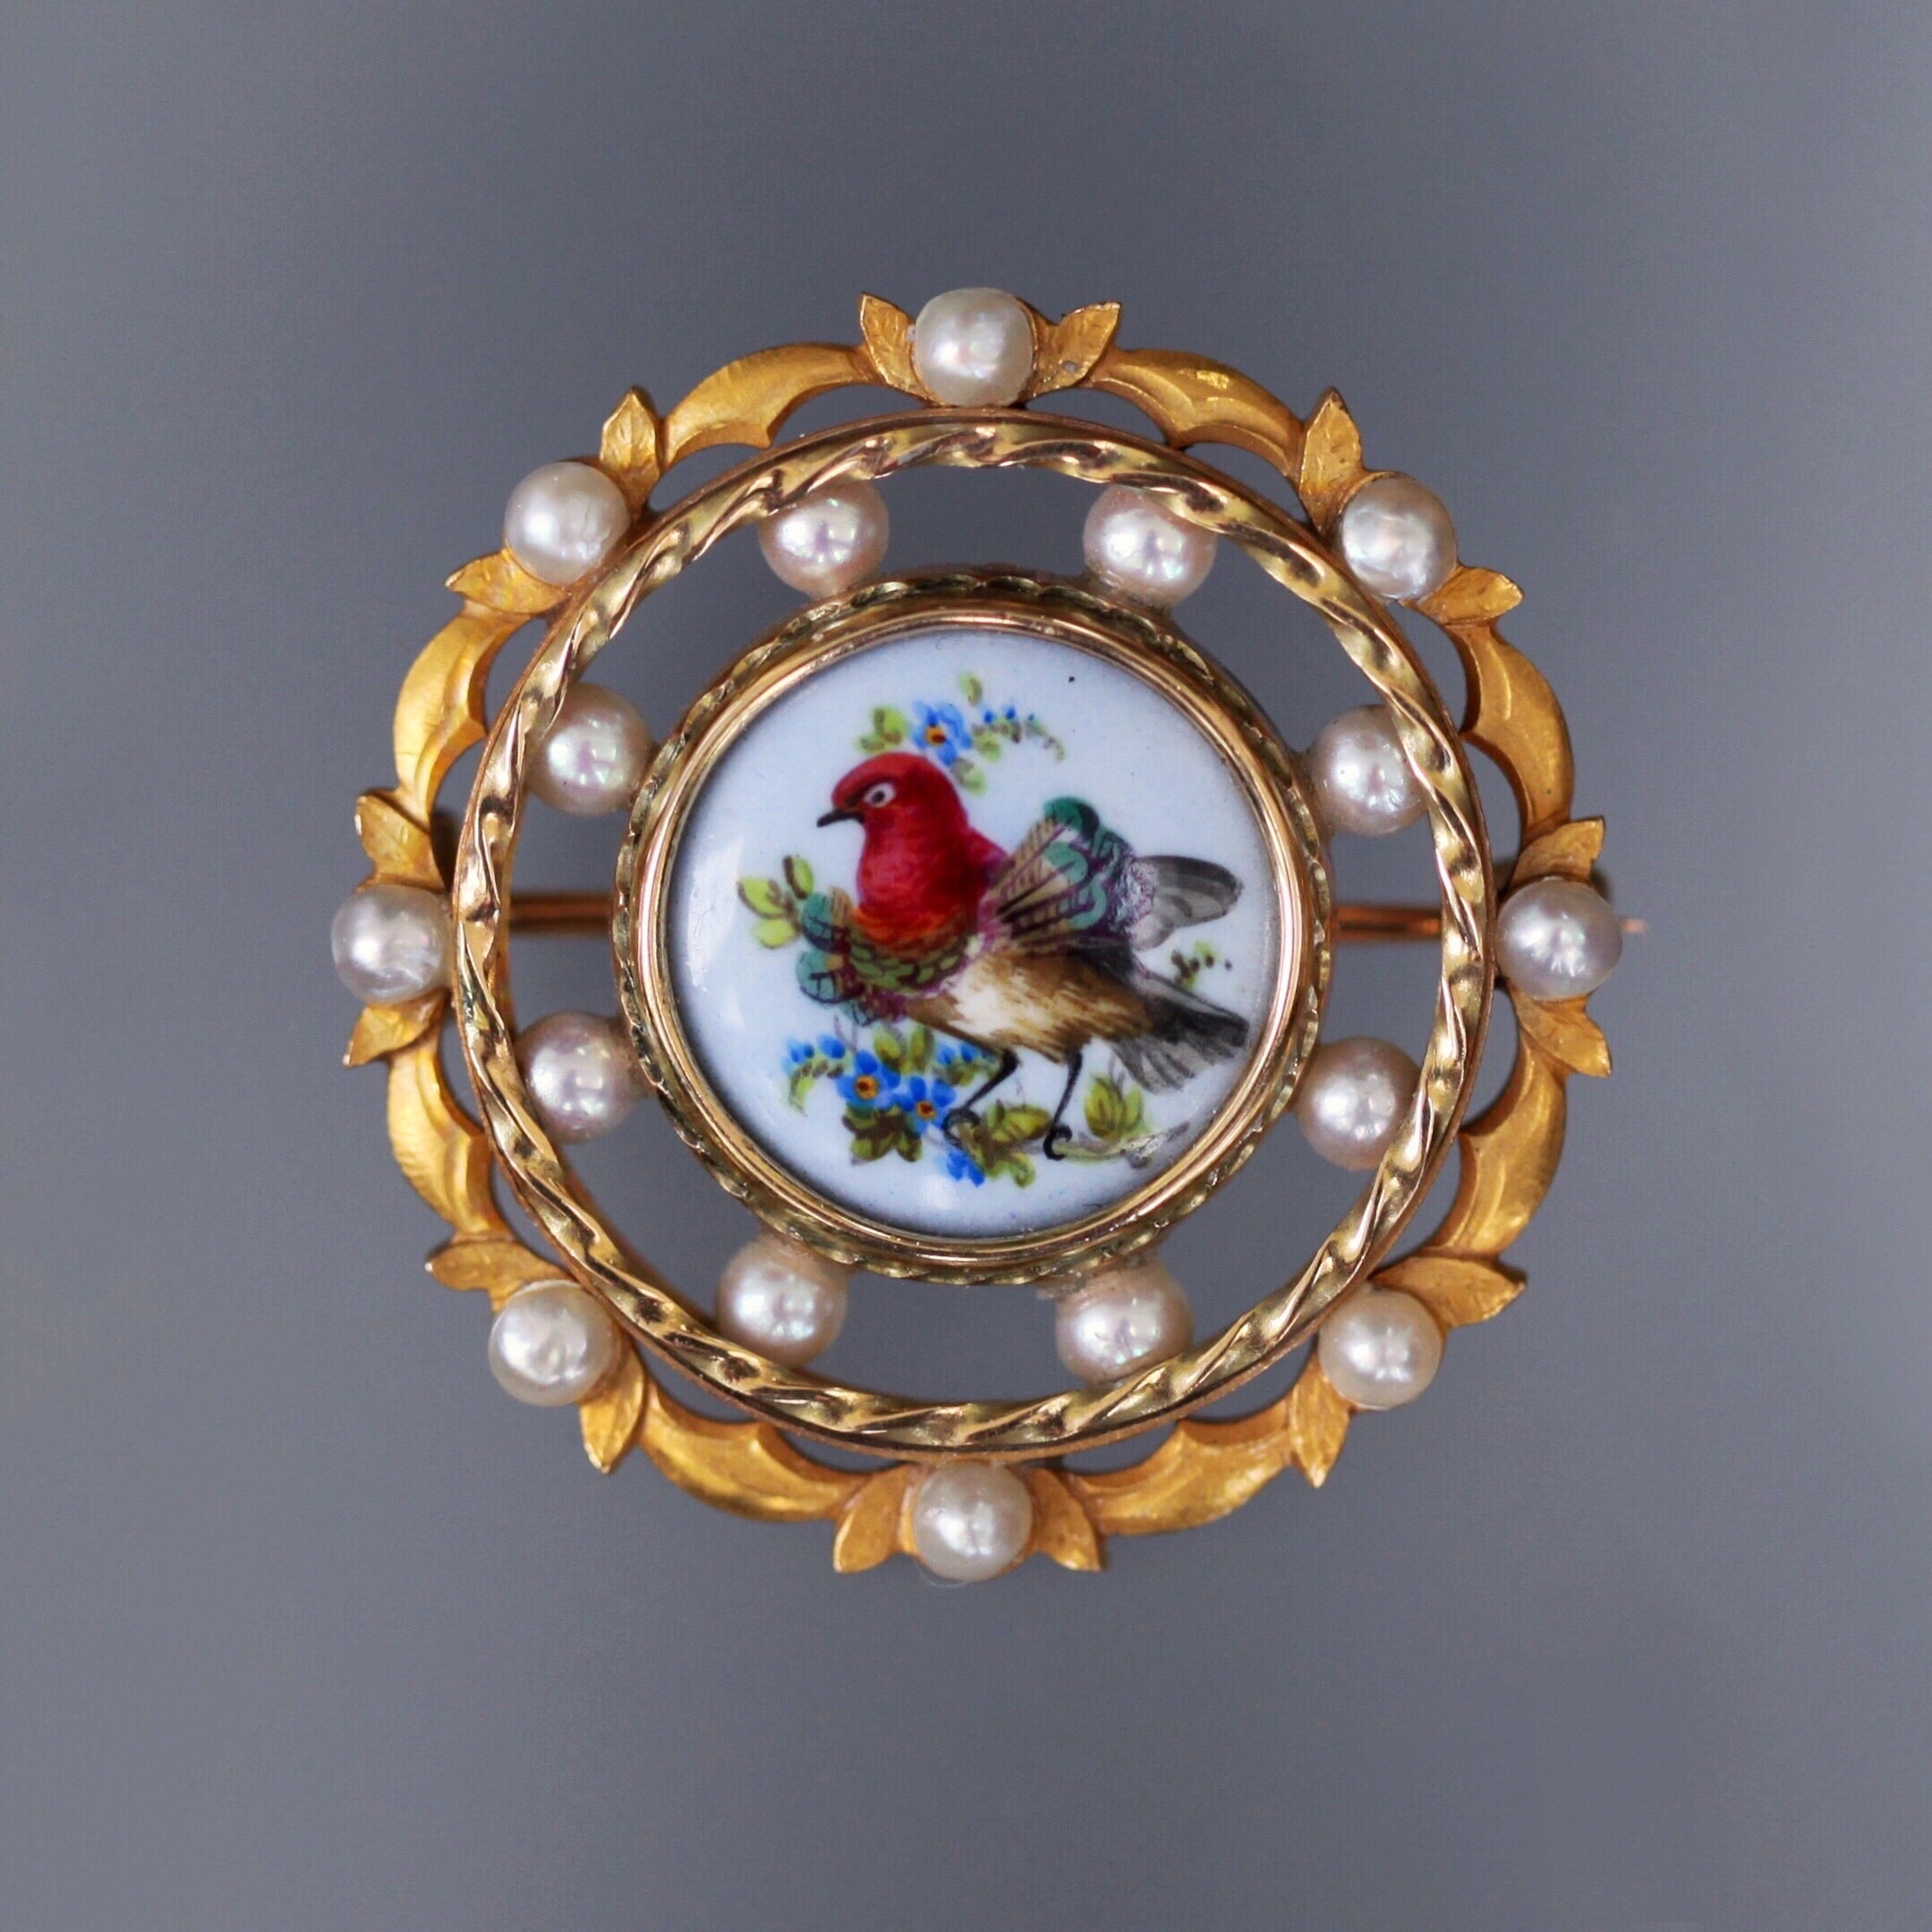 Antique Victorian 18k Gold Porcelain Brooch with Seed Pearls